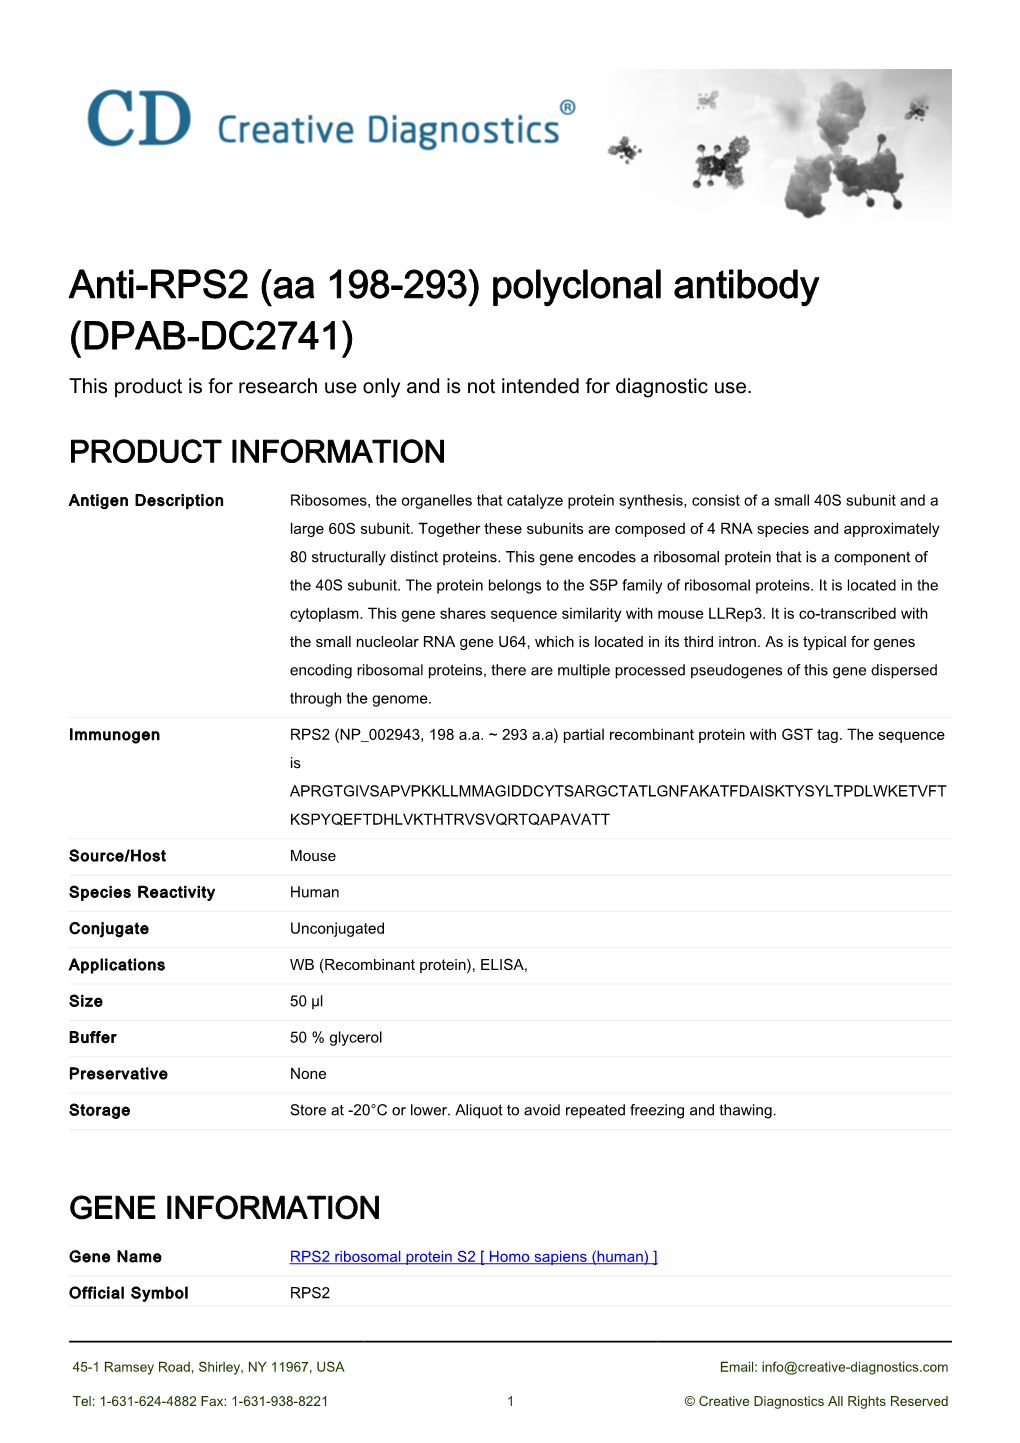 Anti-RPS2 (Aa 198-293) Polyclonal Antibody (DPAB-DC2741) This Product Is for Research Use Only and Is Not Intended for Diagnostic Use